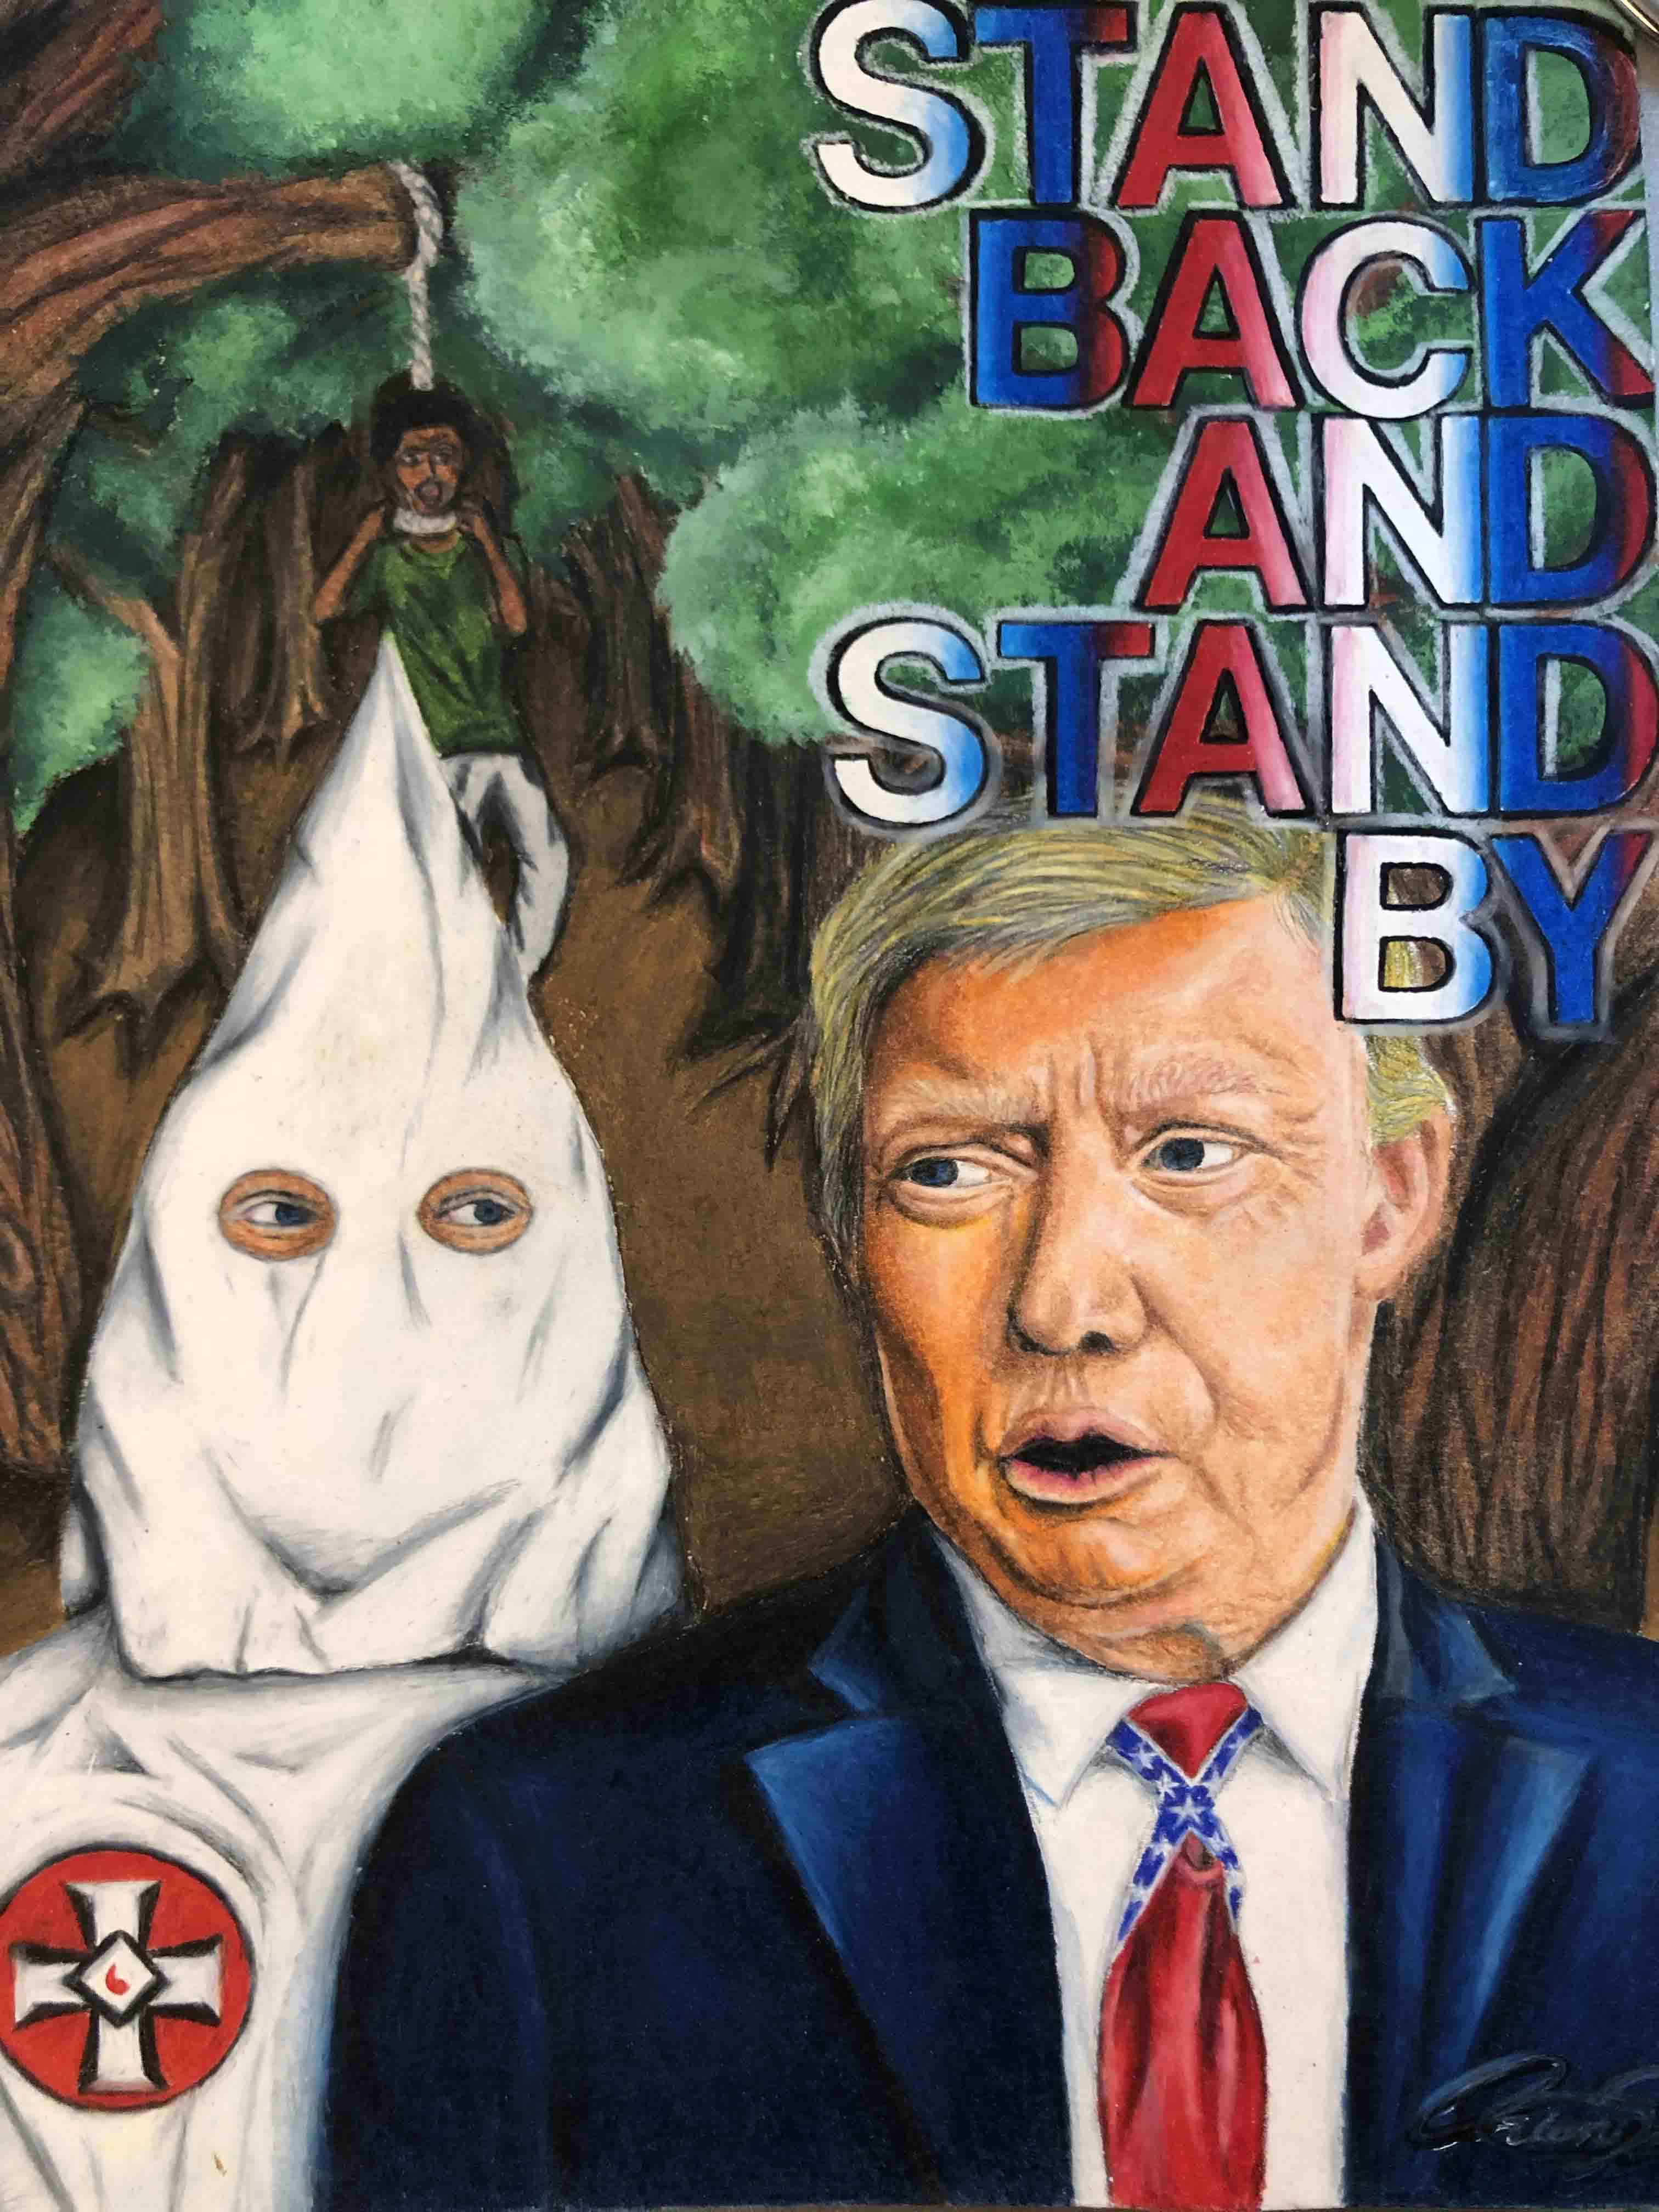 A painting of Donald Trump and a man in a white outfit with his face covered with the text "stand back and stand by"